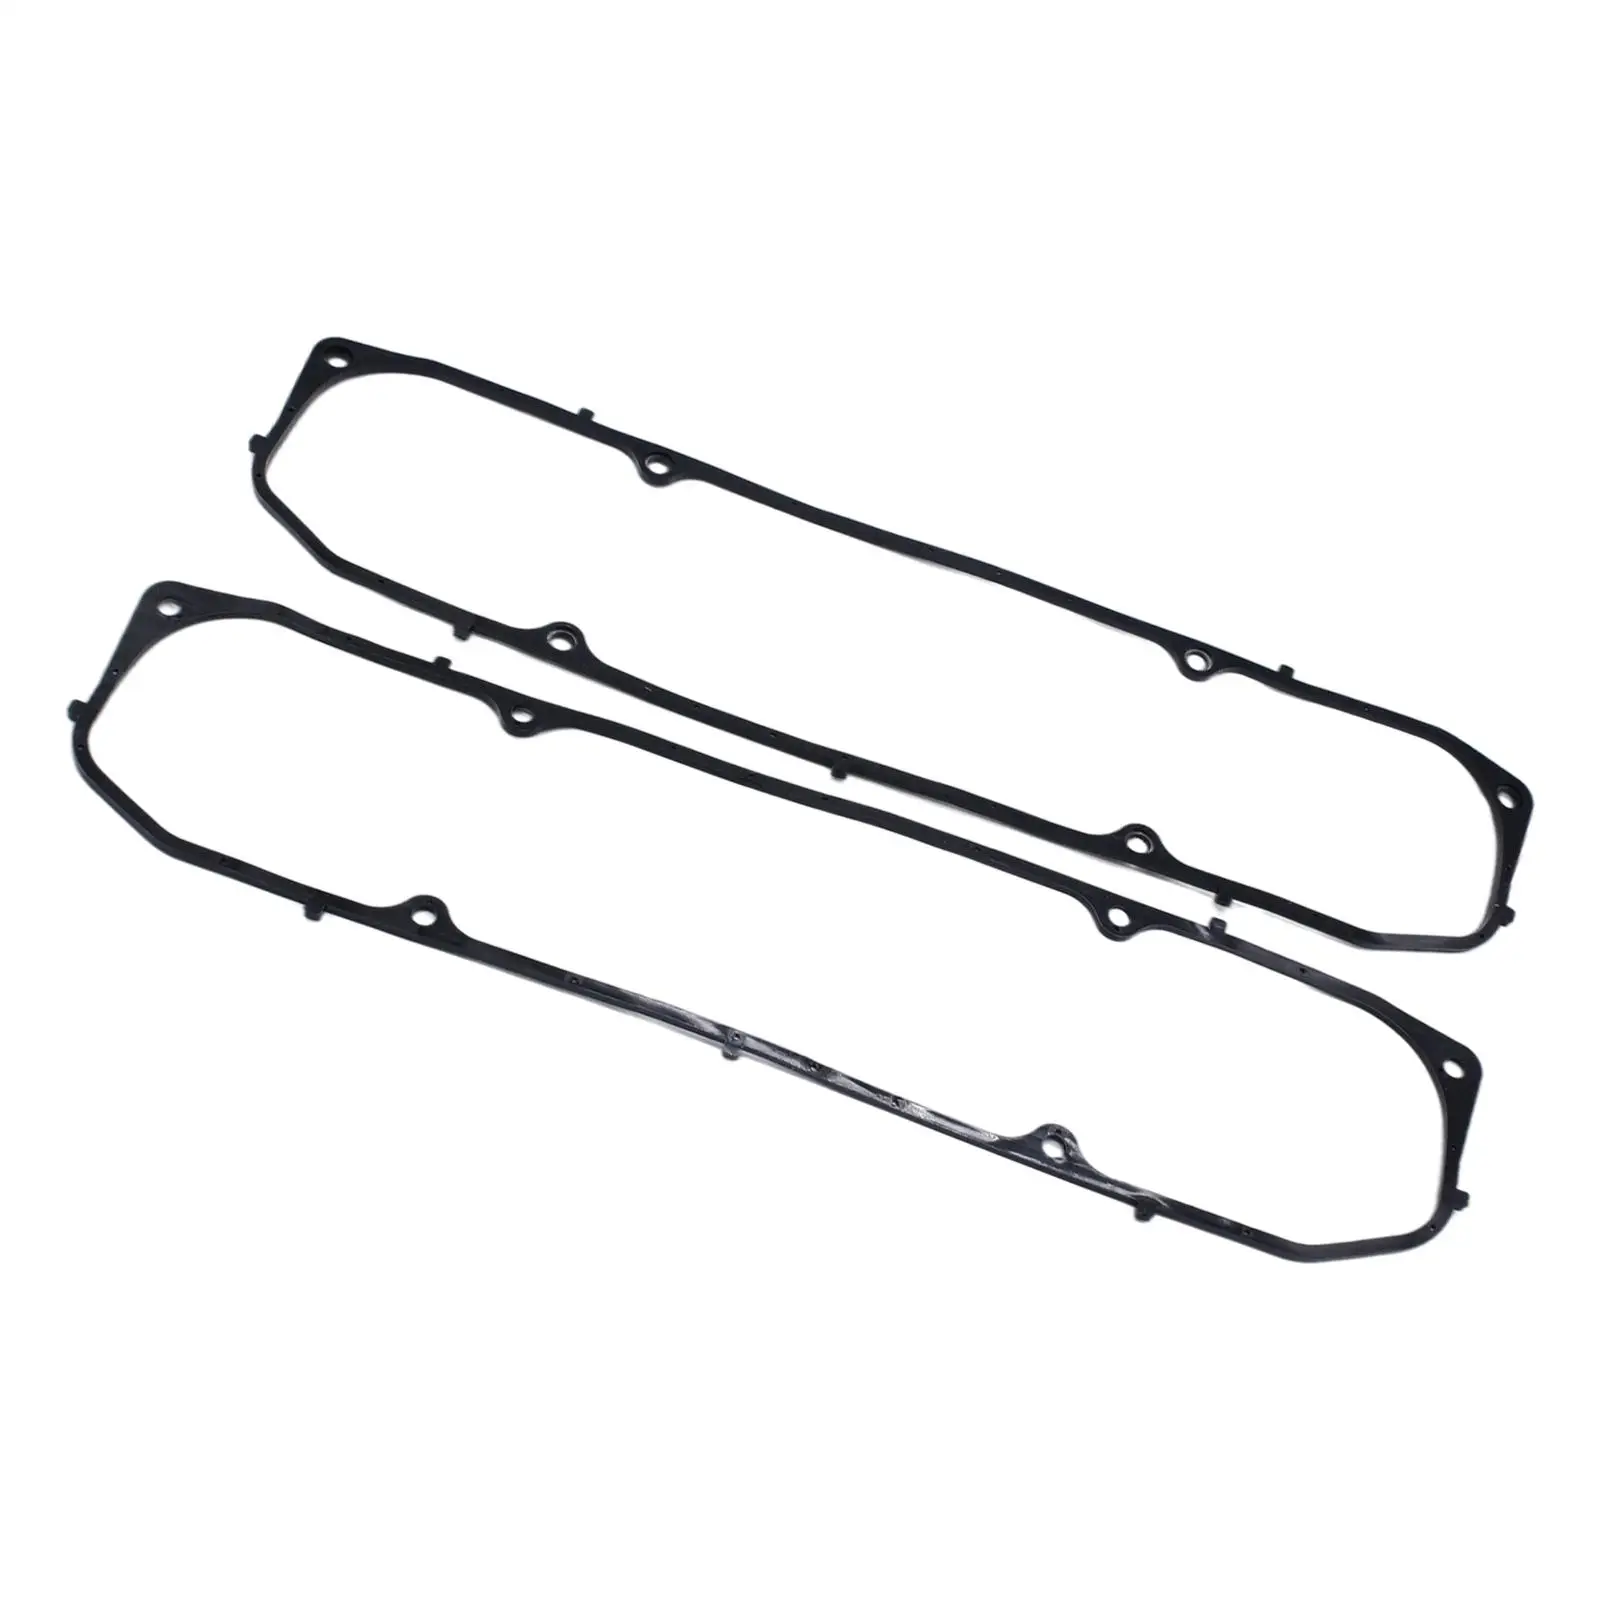 Steel Core Valve Cover Gaskets Rubber Replacement 3/16`` Thick Big Block 383 400 440 Car Accessories Fits for Plymouth